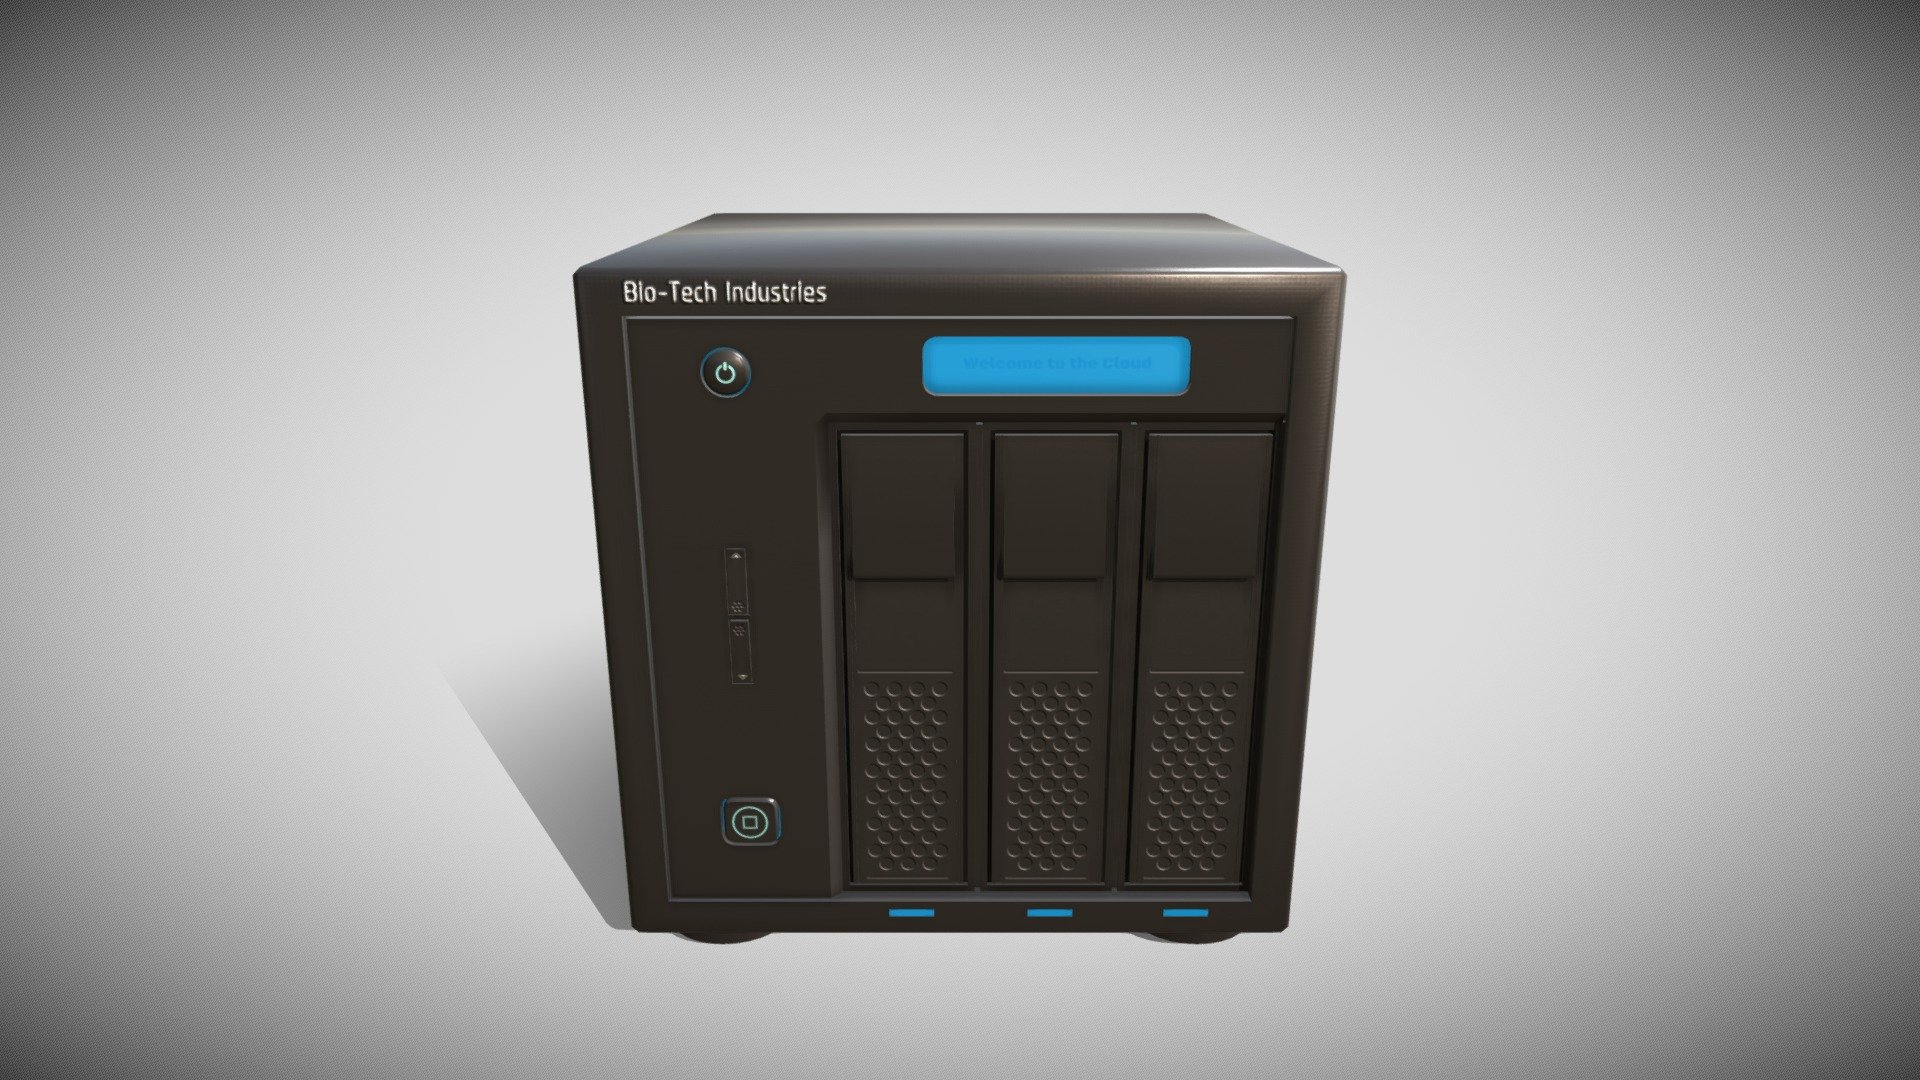 Generic mini server box - (Bio-Tech Industries is just a random name on many of my models)

Hand-painted using Substance Painter. PBR - AR/ VR - Low-Poly

Google, Unity and Unreal Engine Friendly

Game-ready

Textures; 2048 x 2048, OpenGL, Dilation + Single Background Colour, 16 Pixel Padding

Maps Include; Base, Normal, Height, Rough, Emmisive, and Metal.

Please Note: This model may or may not 3D Print. Download at your own risk.

My Blog: https://stgbooks.blogspot.com/ - Server Box - Buy Royalty Free 3D model by Simon T Griffiths (@RubberMan) 3d model